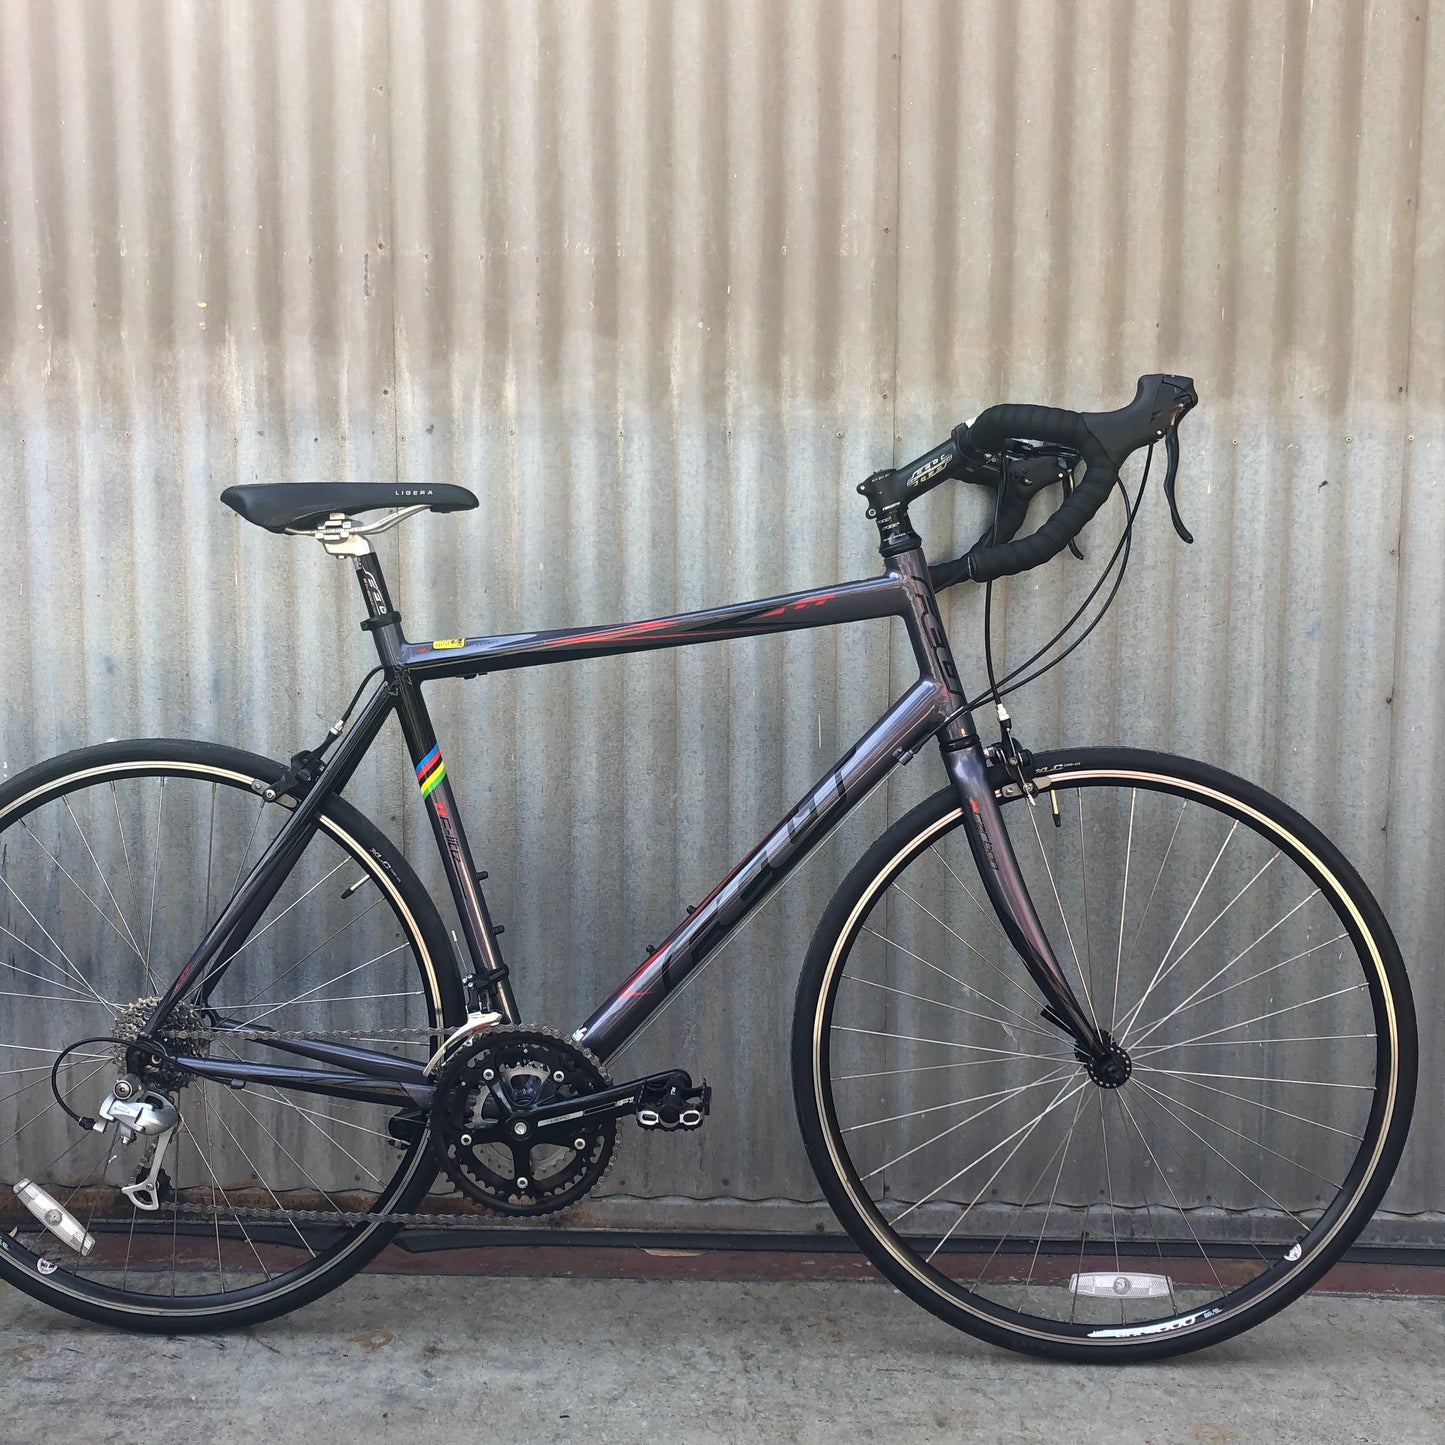 Felt Z100 - Great Used, Super Clean Entry Level Road Bike from a Great Brand